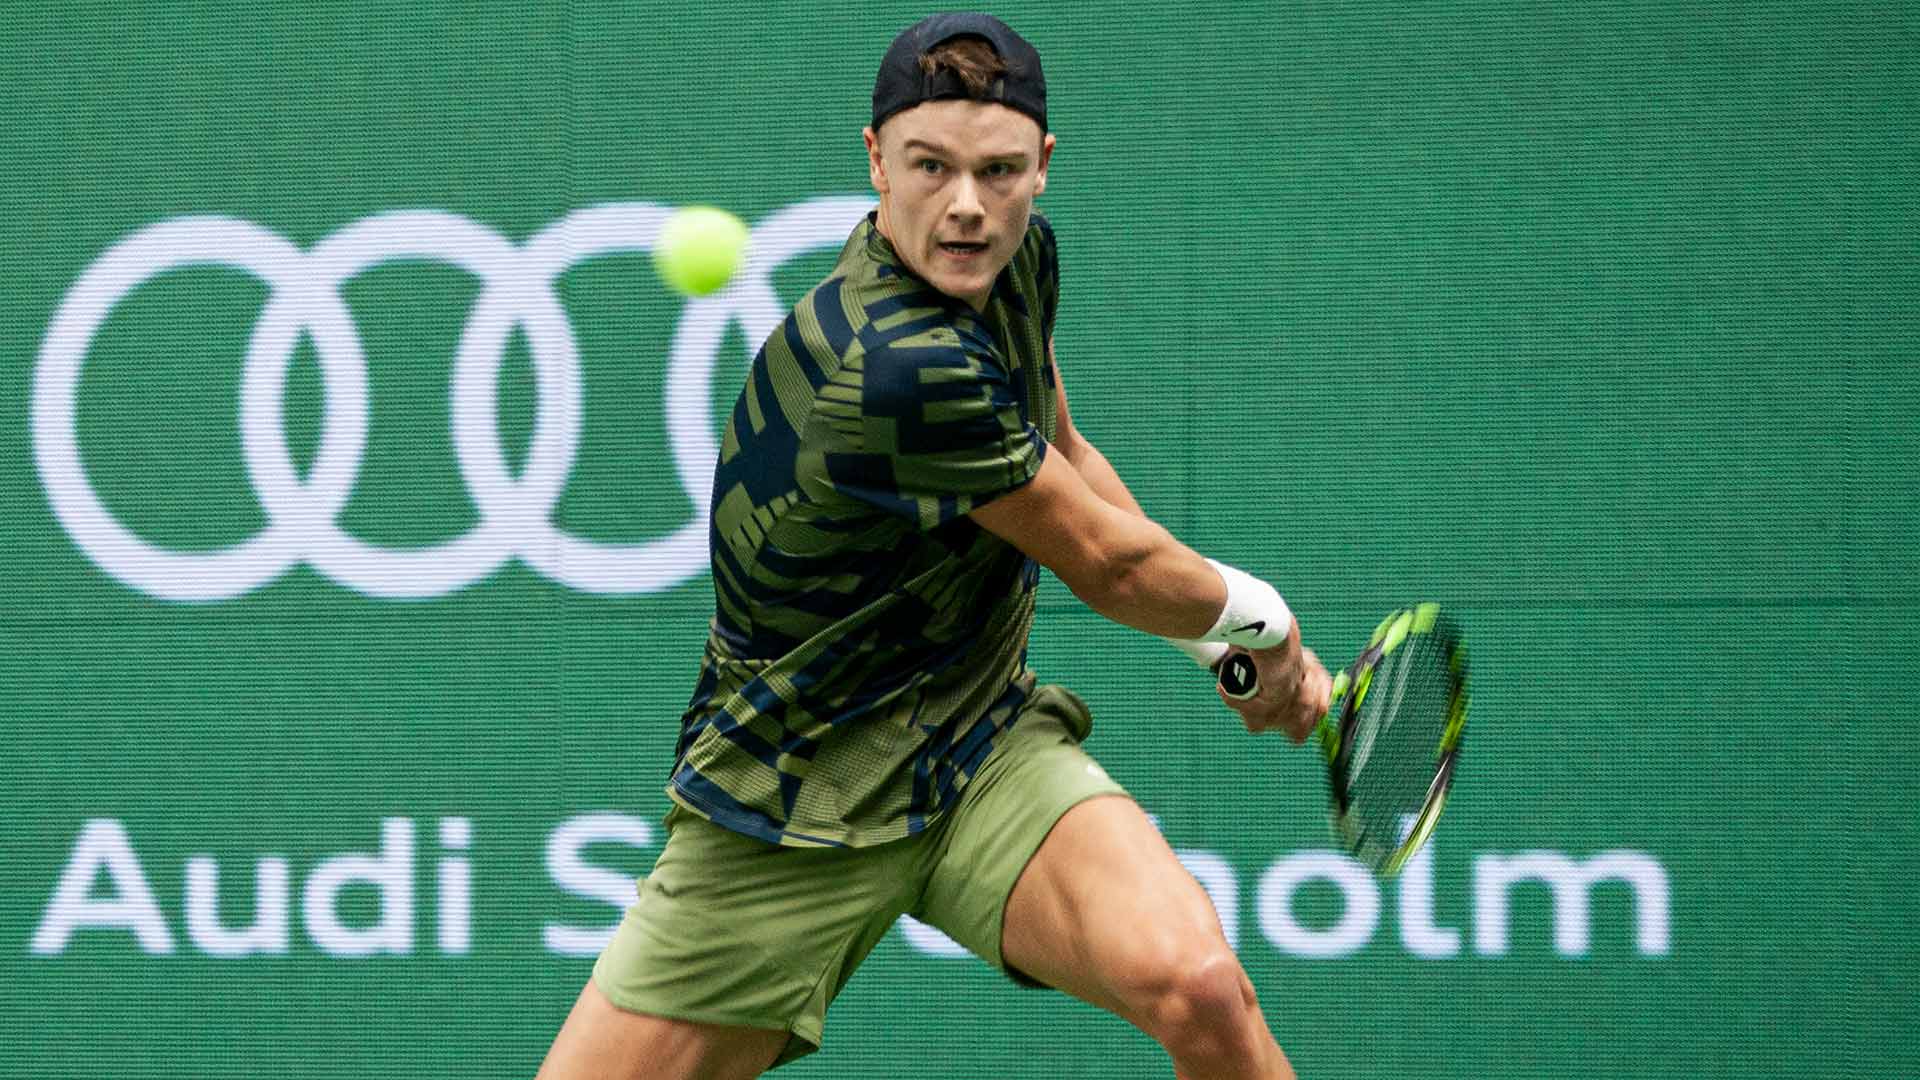 Holger Rune defeats Cameron Norrie on Friday to reach the semi-finals of the Stockholm Open.